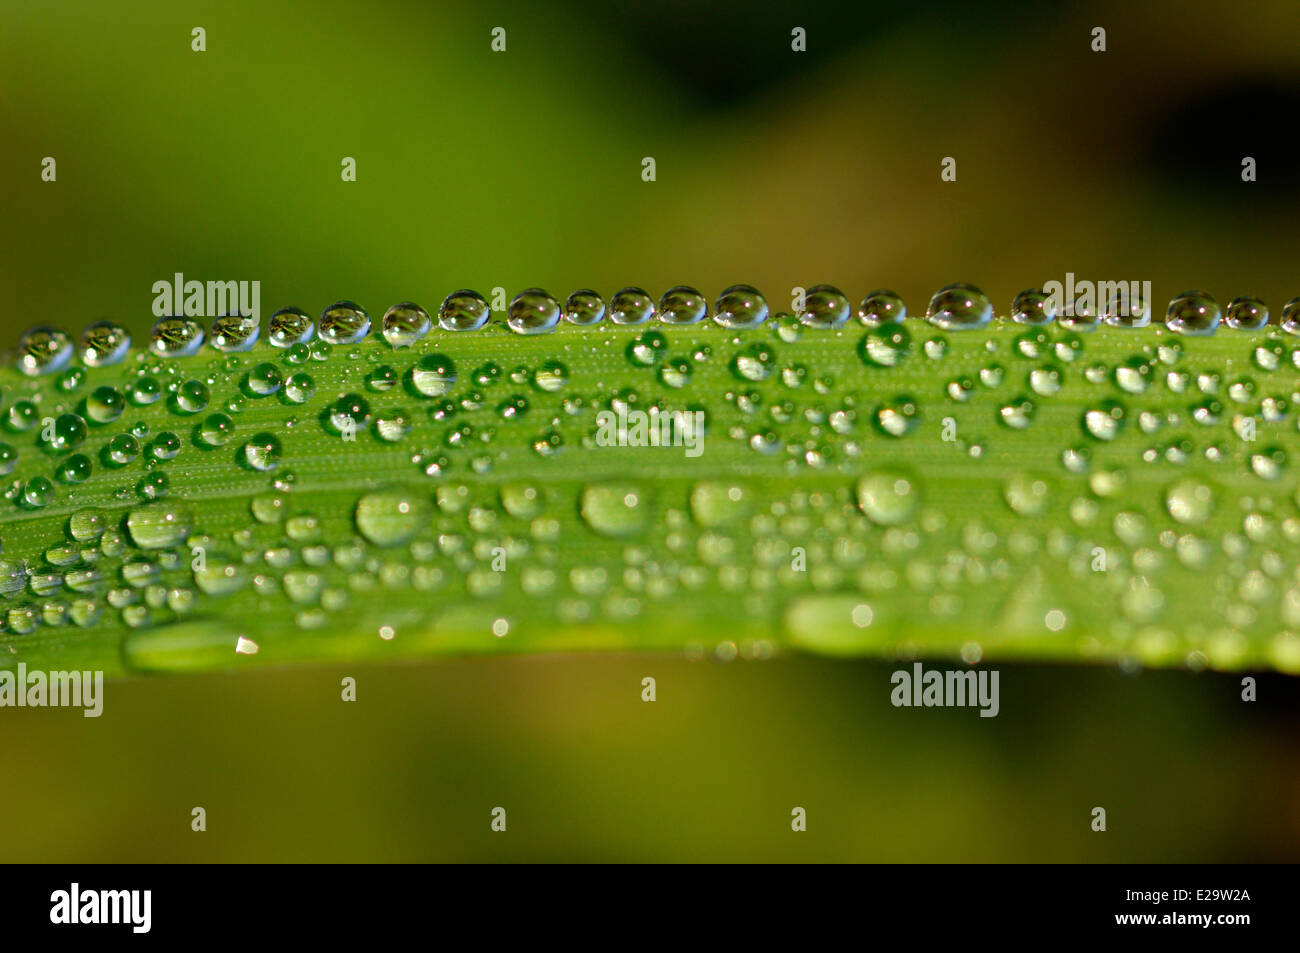 France, Ardennes, Carignan, drops of water aligned with the edge of a green sheet Stock Photo